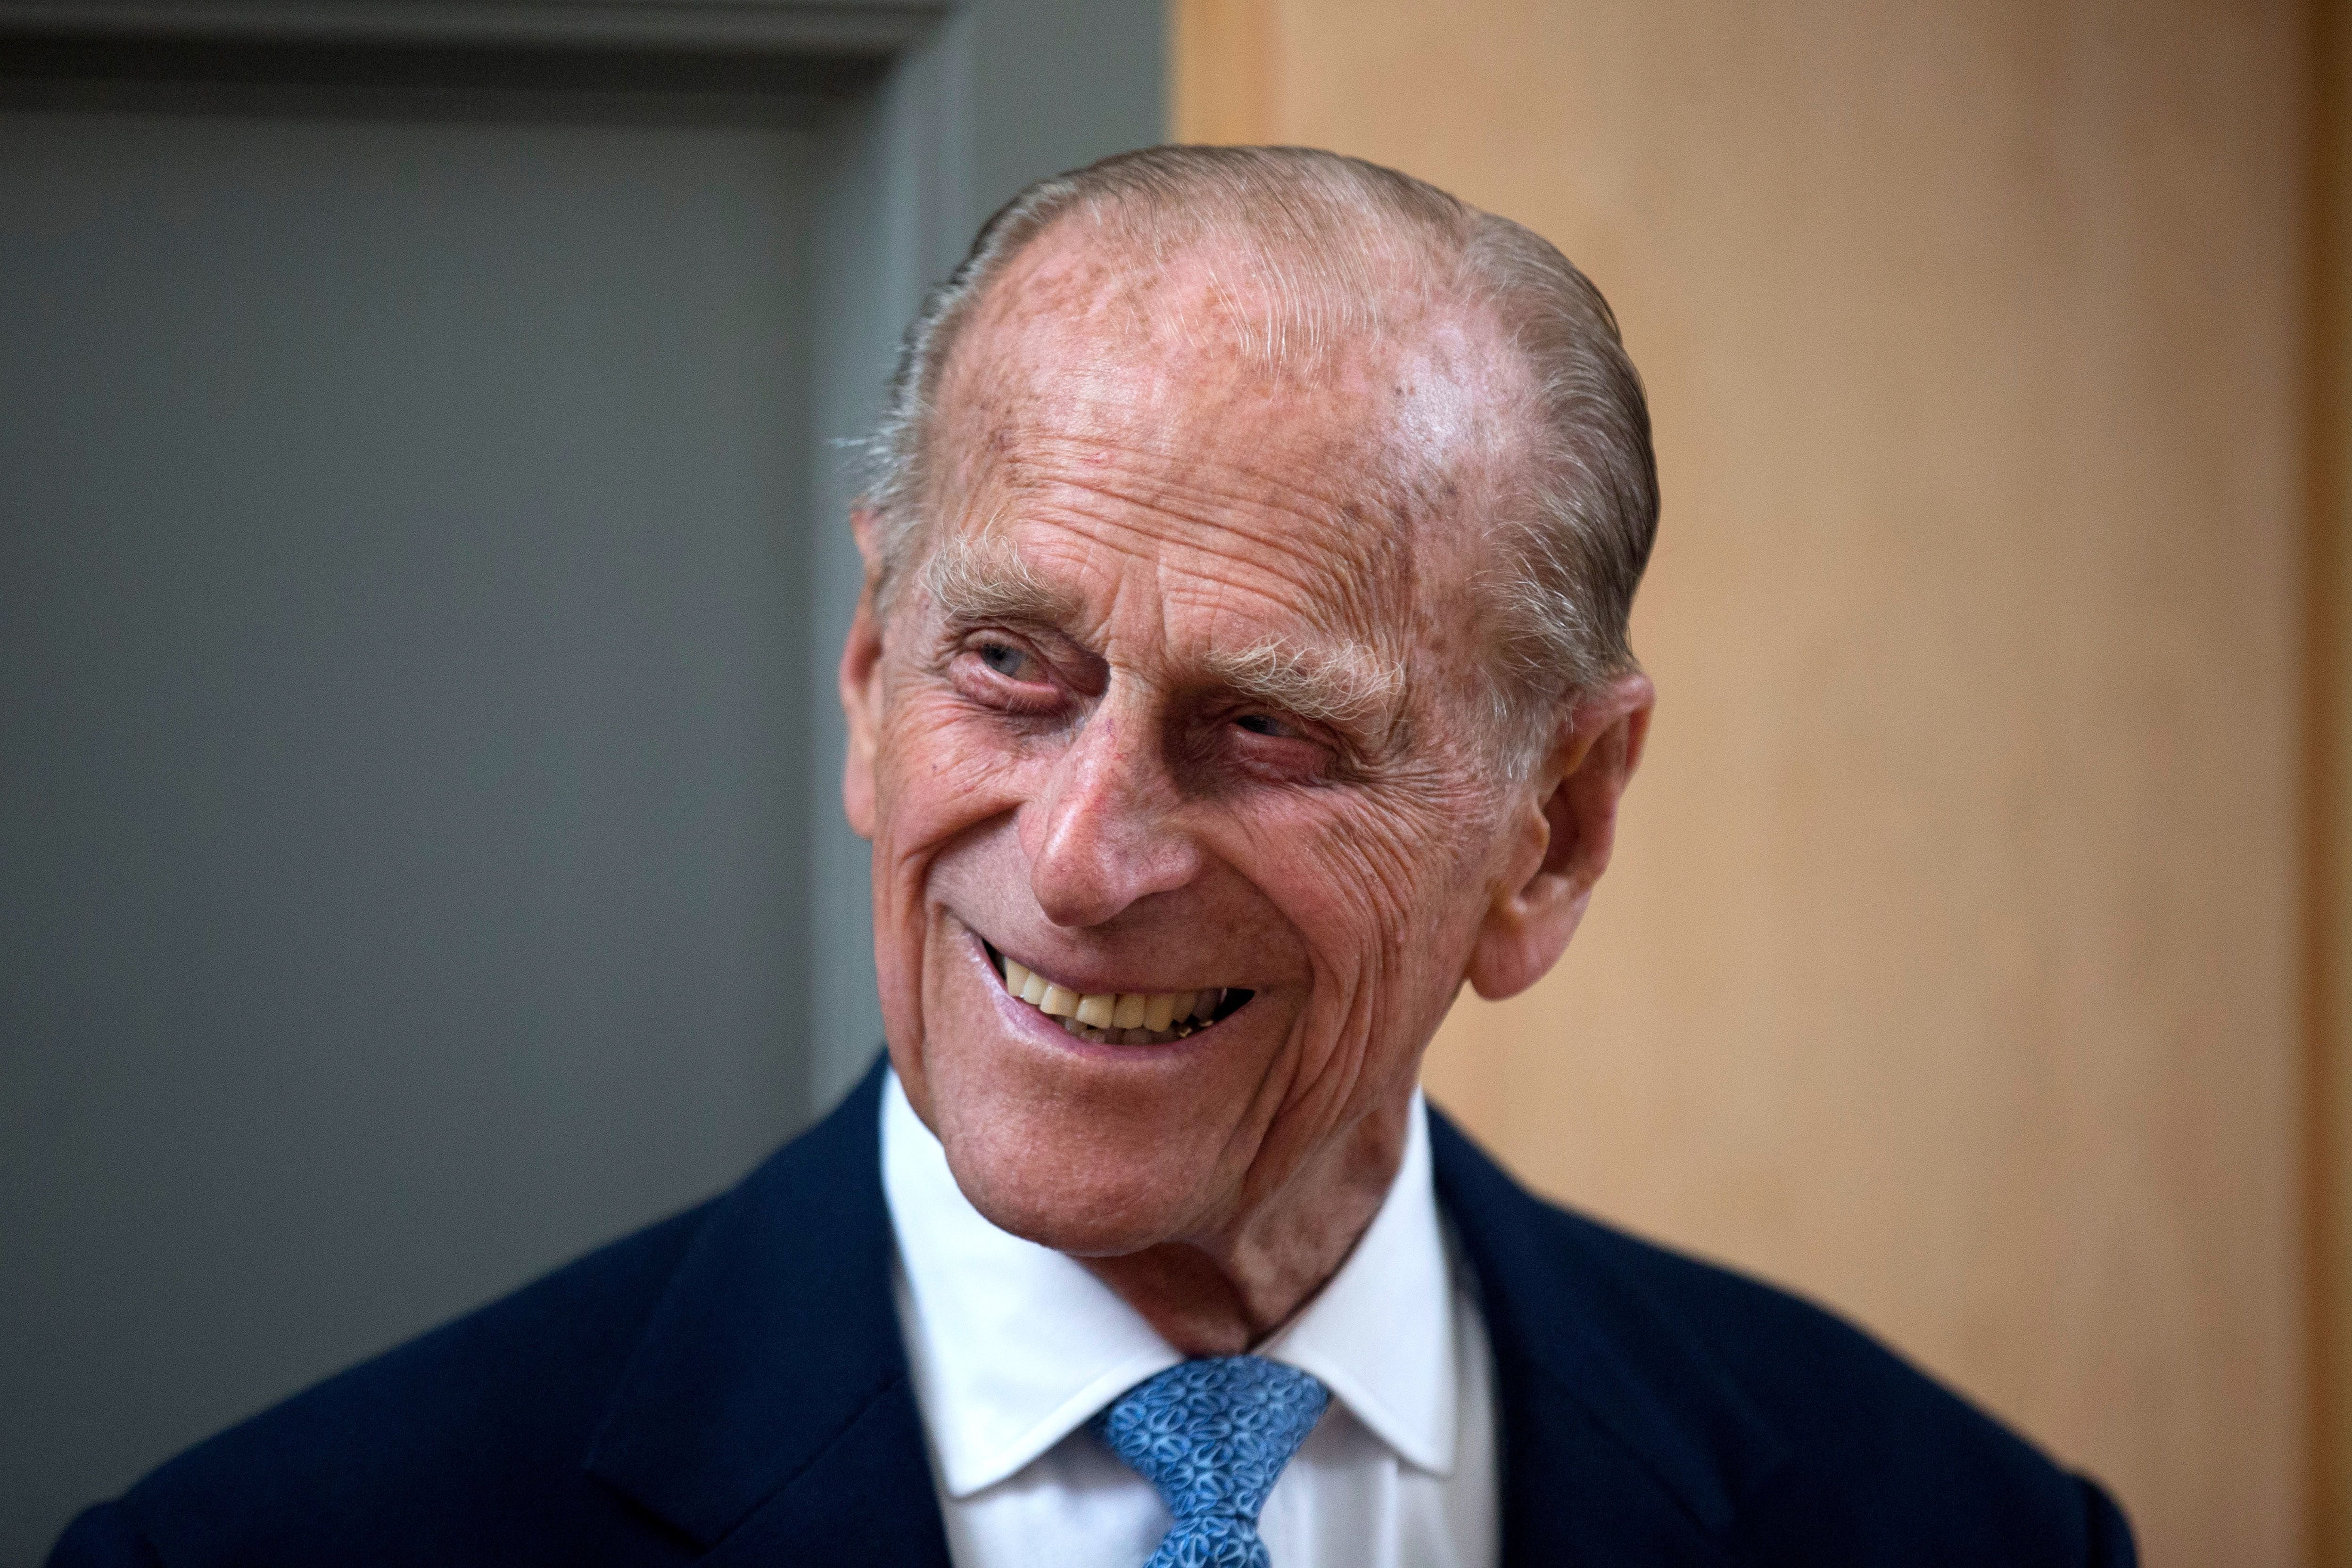 Prince Philip during his visit to Richmond Adult Community College in Richmond on June 8, 2015 in London, England. | Source: Getty Images